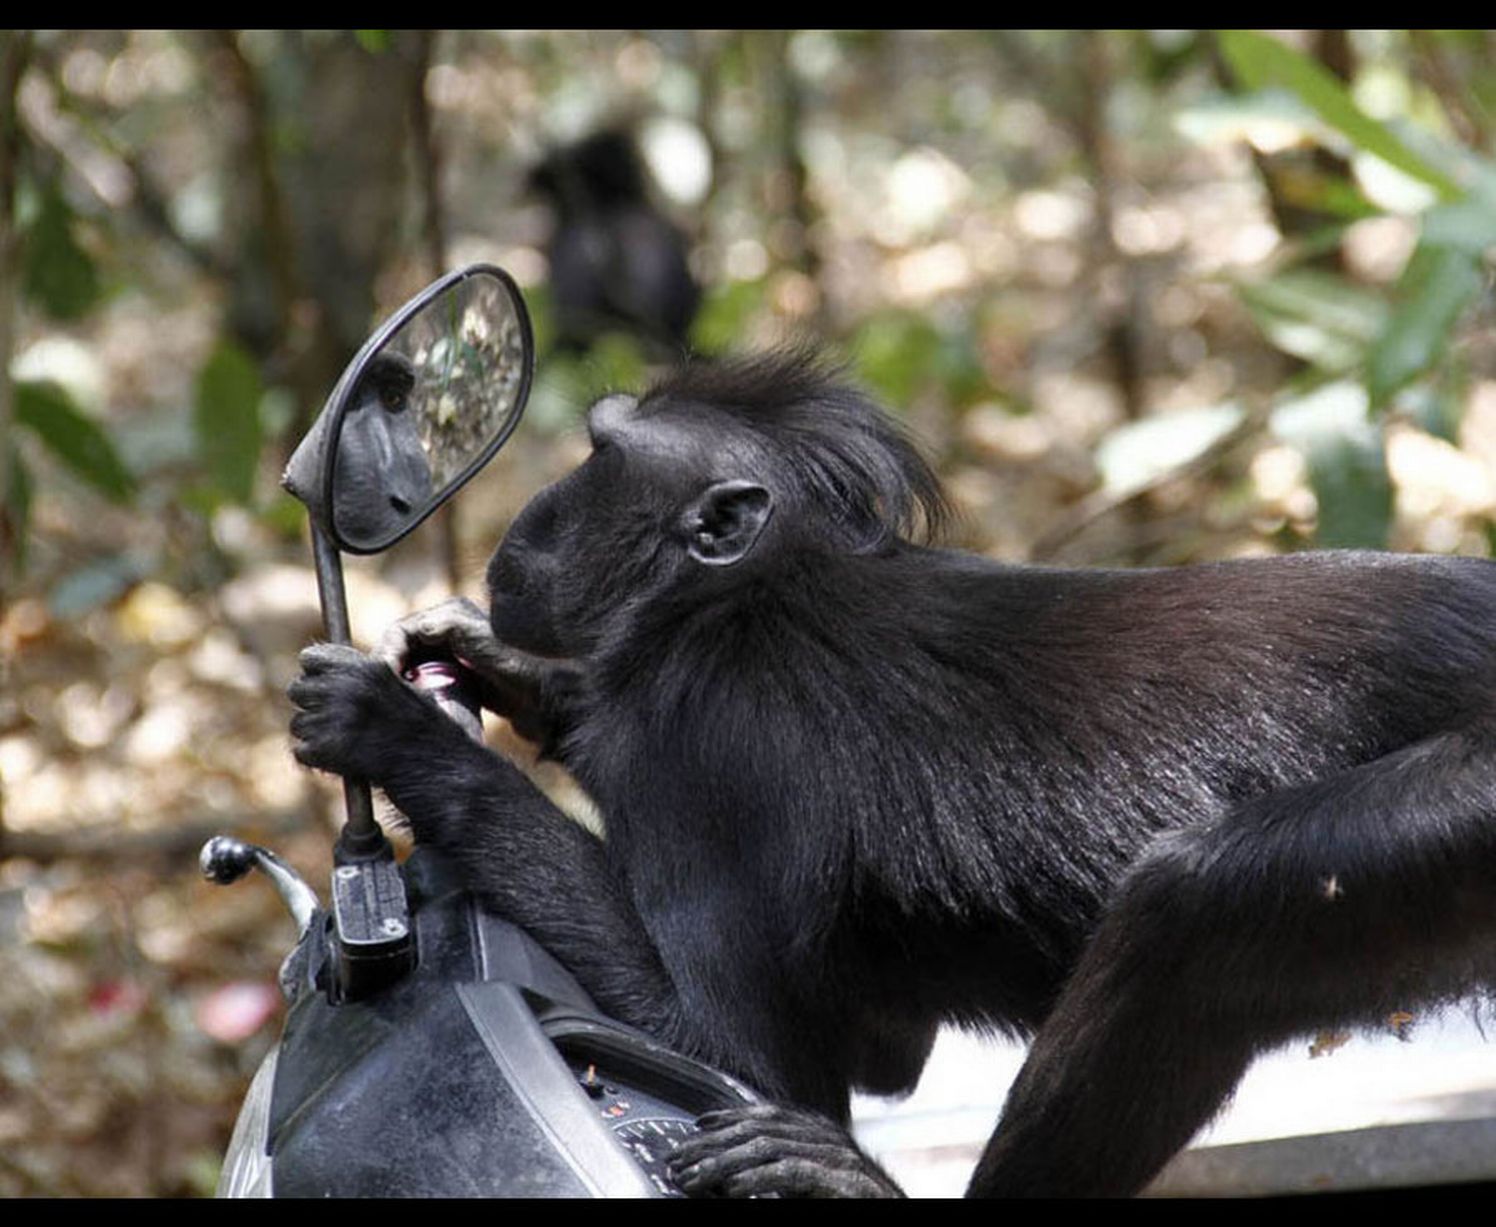 This monkey checks himself out in the mirror